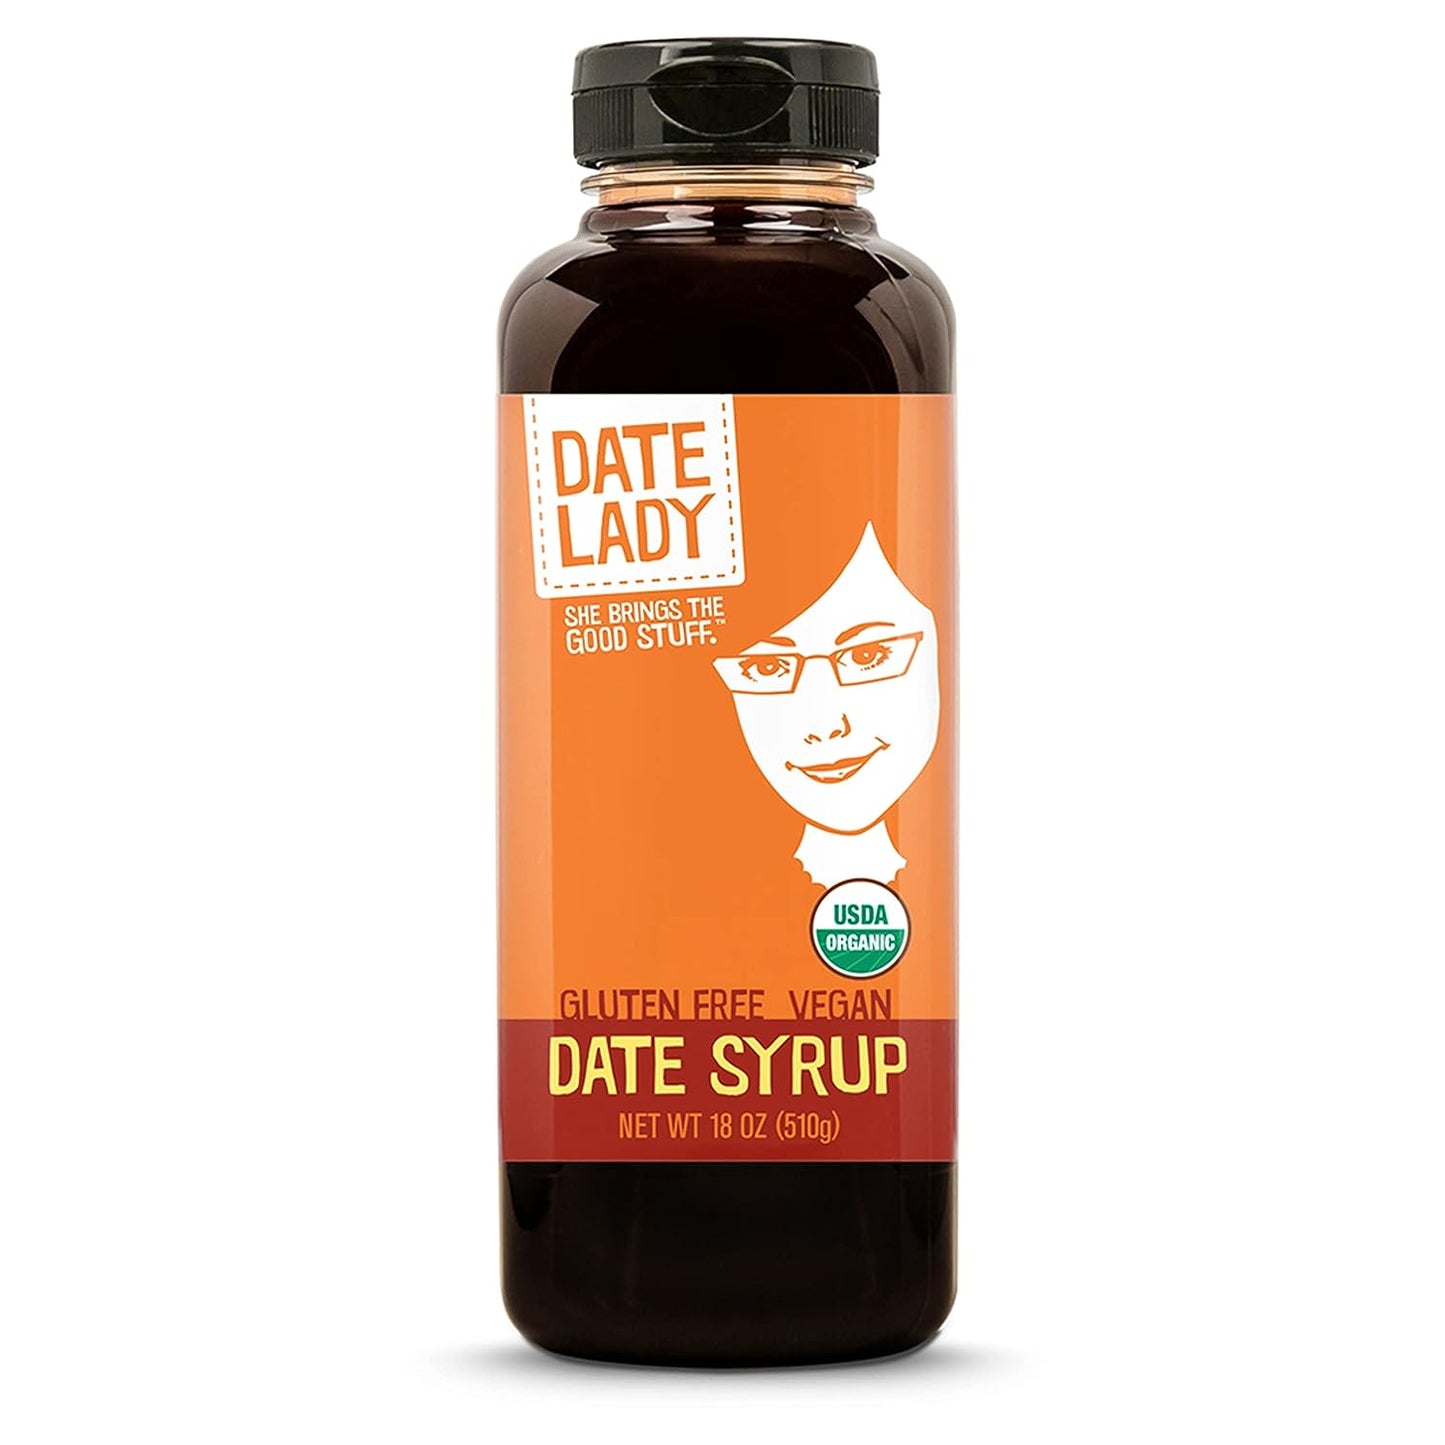 Award Winning Organic Date Syrup 18 oz Squeeze Bottle | Vegan, Paleo, Gluten-free & Kosher | Sugar Substitute | More Nutrition Than Maple Syrup or Honey